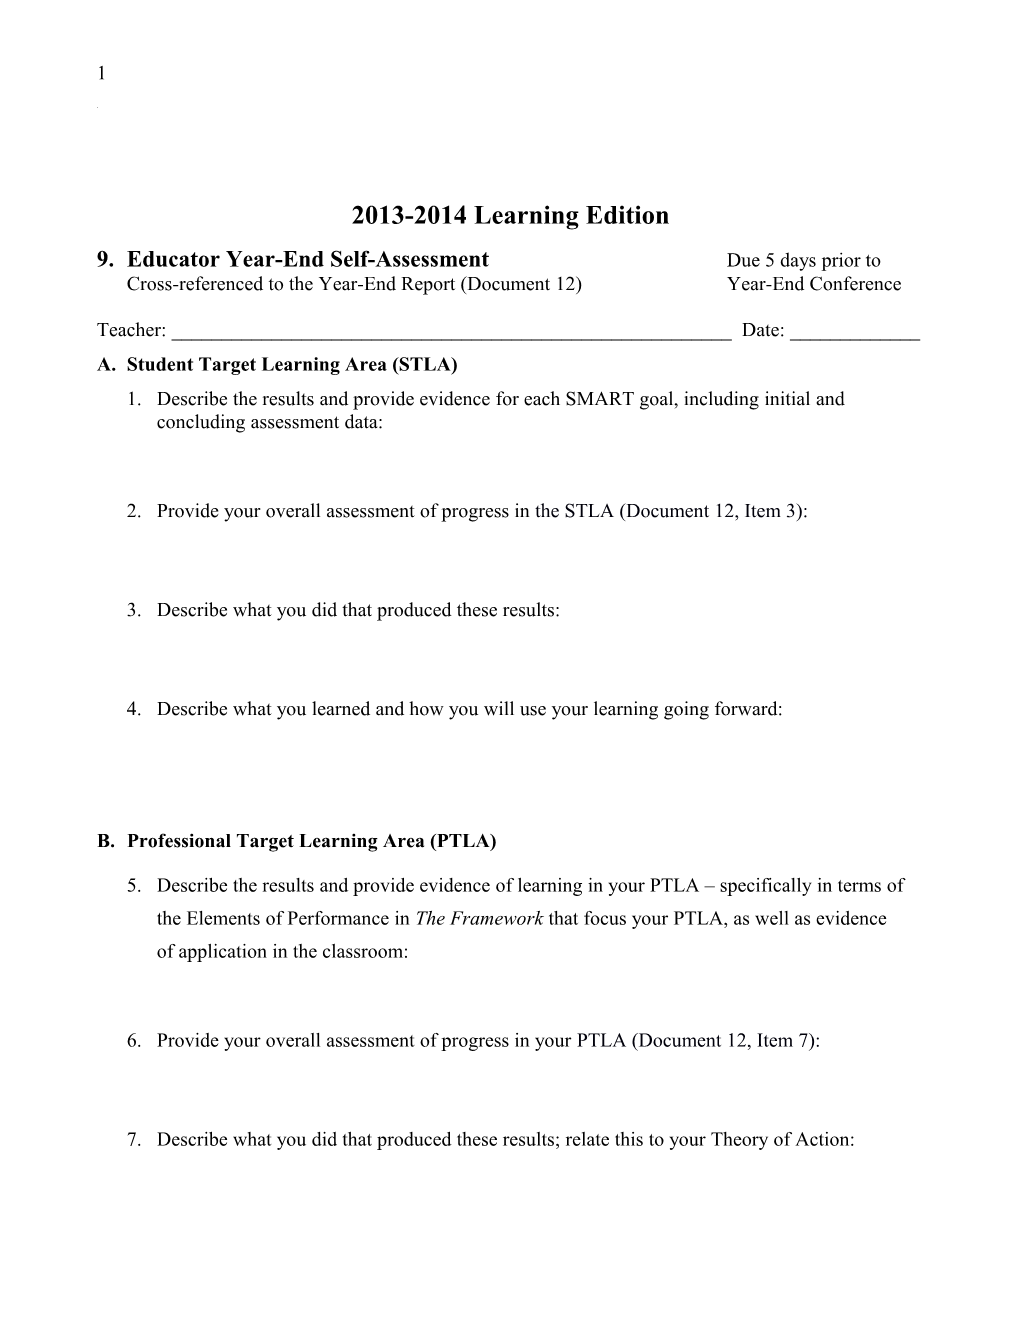 9.Educator Year-End Self-Assessment Due 5 Days Prior To